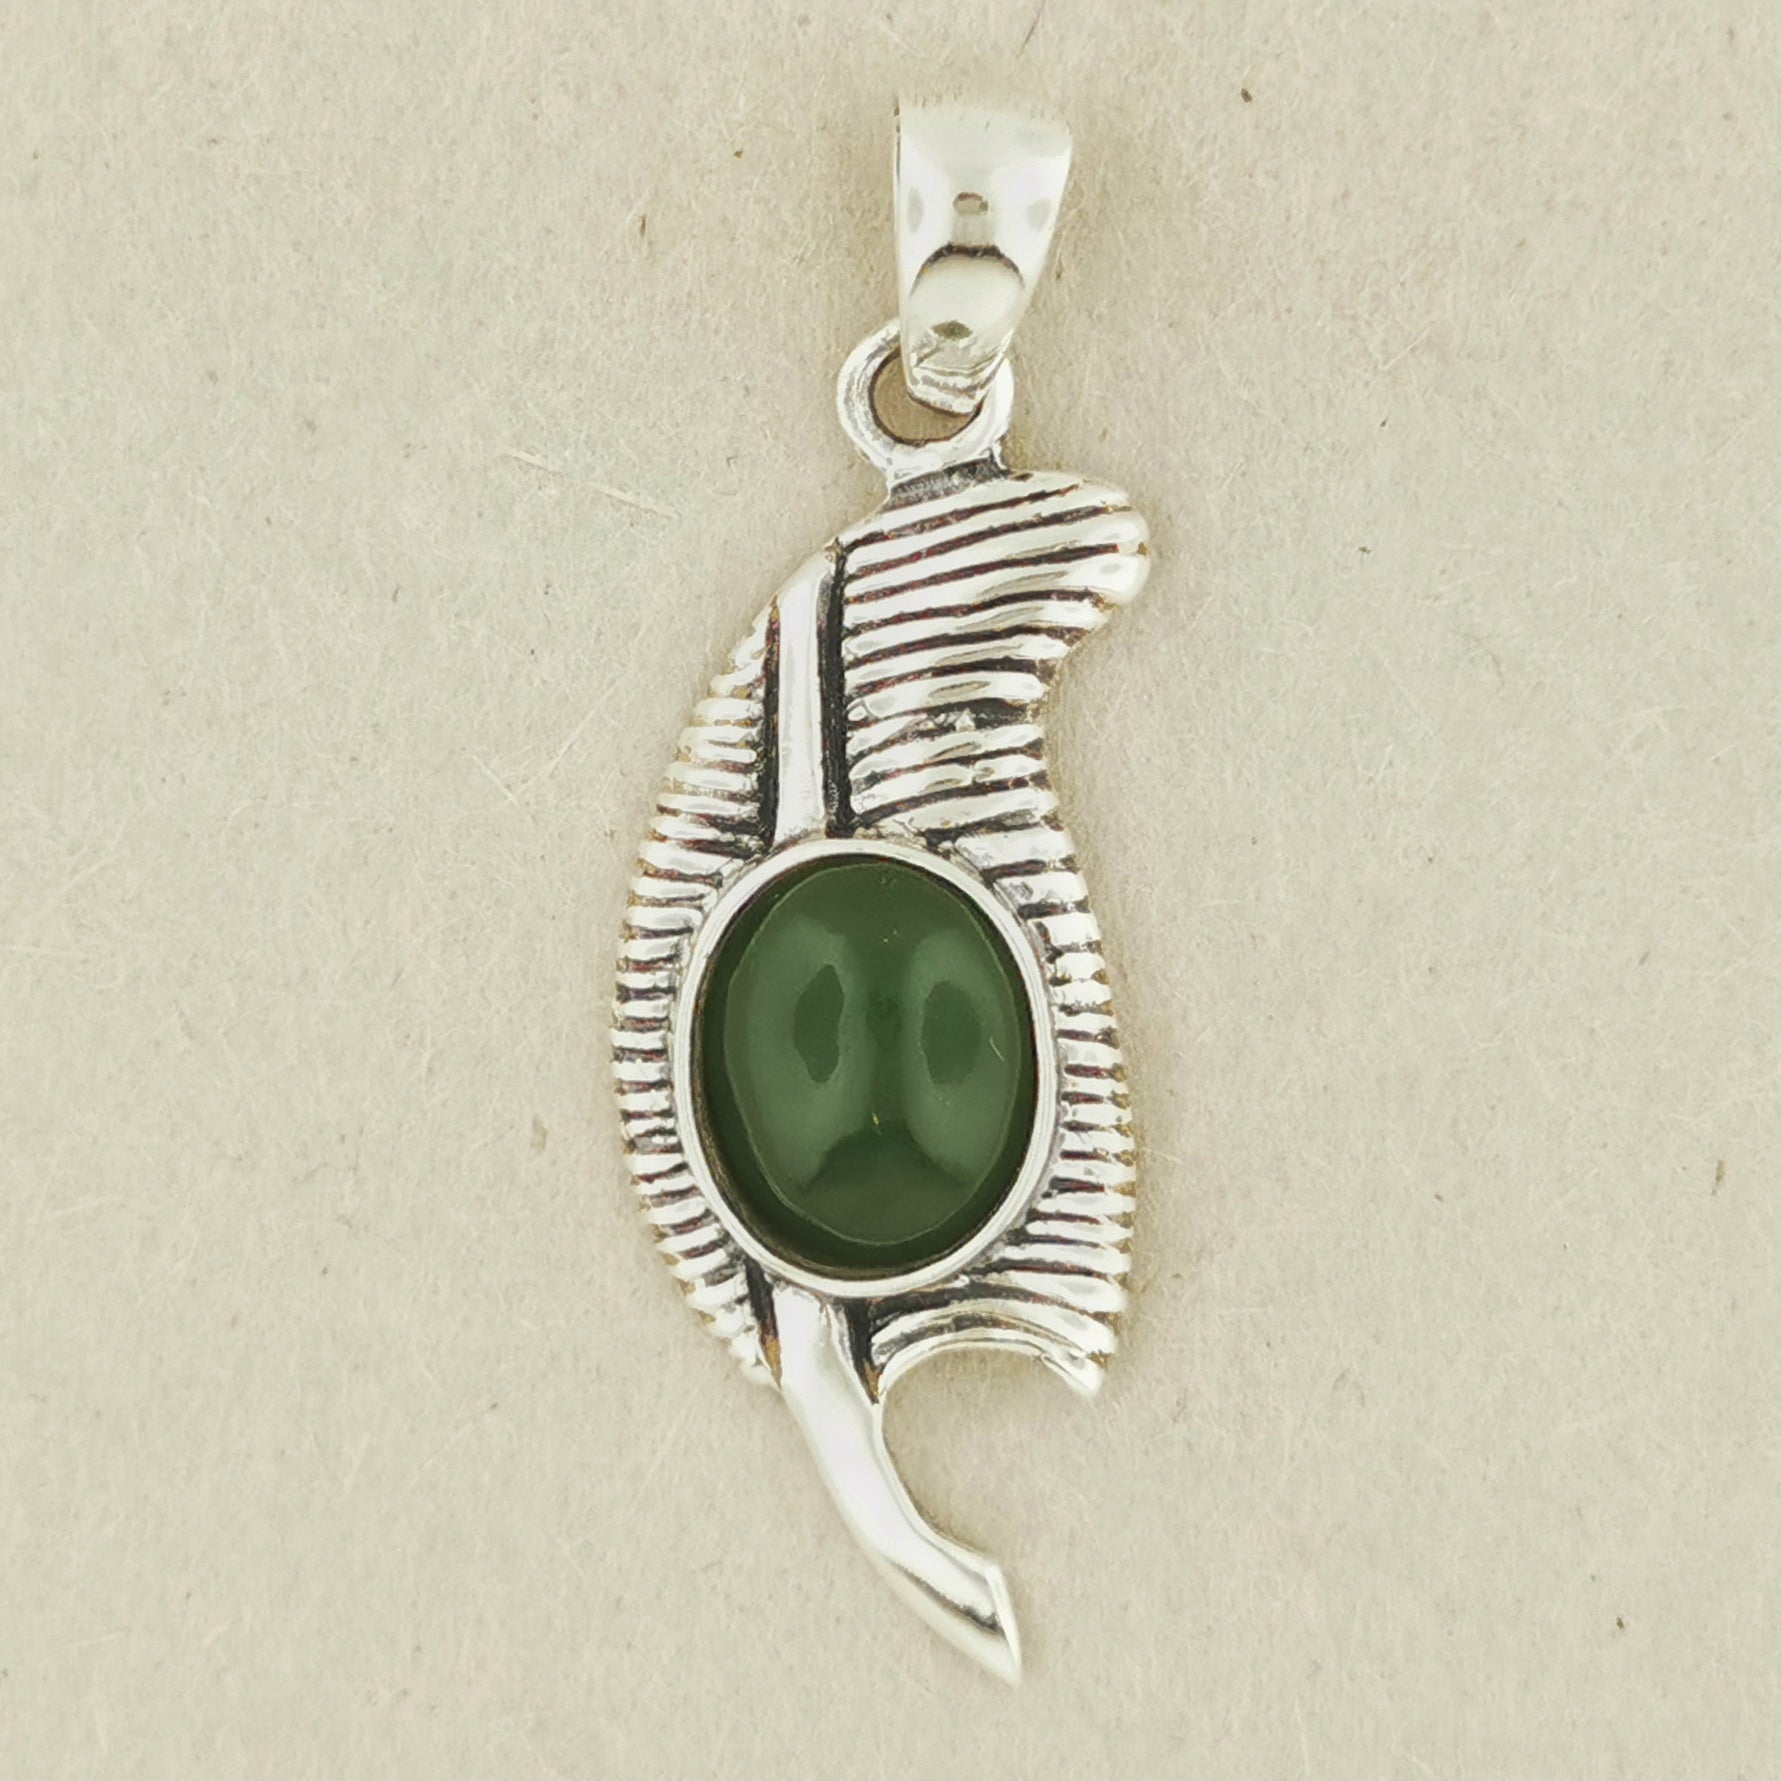 Feather of Ma'at Pendant in Sterling Silver with Nephrite Jade, Egyptian Feather Pendant, Egyptian Goddess Pendant, Goddess of Truth Pendant, Silver Egyptian Feather Pendant, Silver Ma’at Pendant, Egyptian Silver Pendant, Silver Gemstone Egyptian Feather Pendant